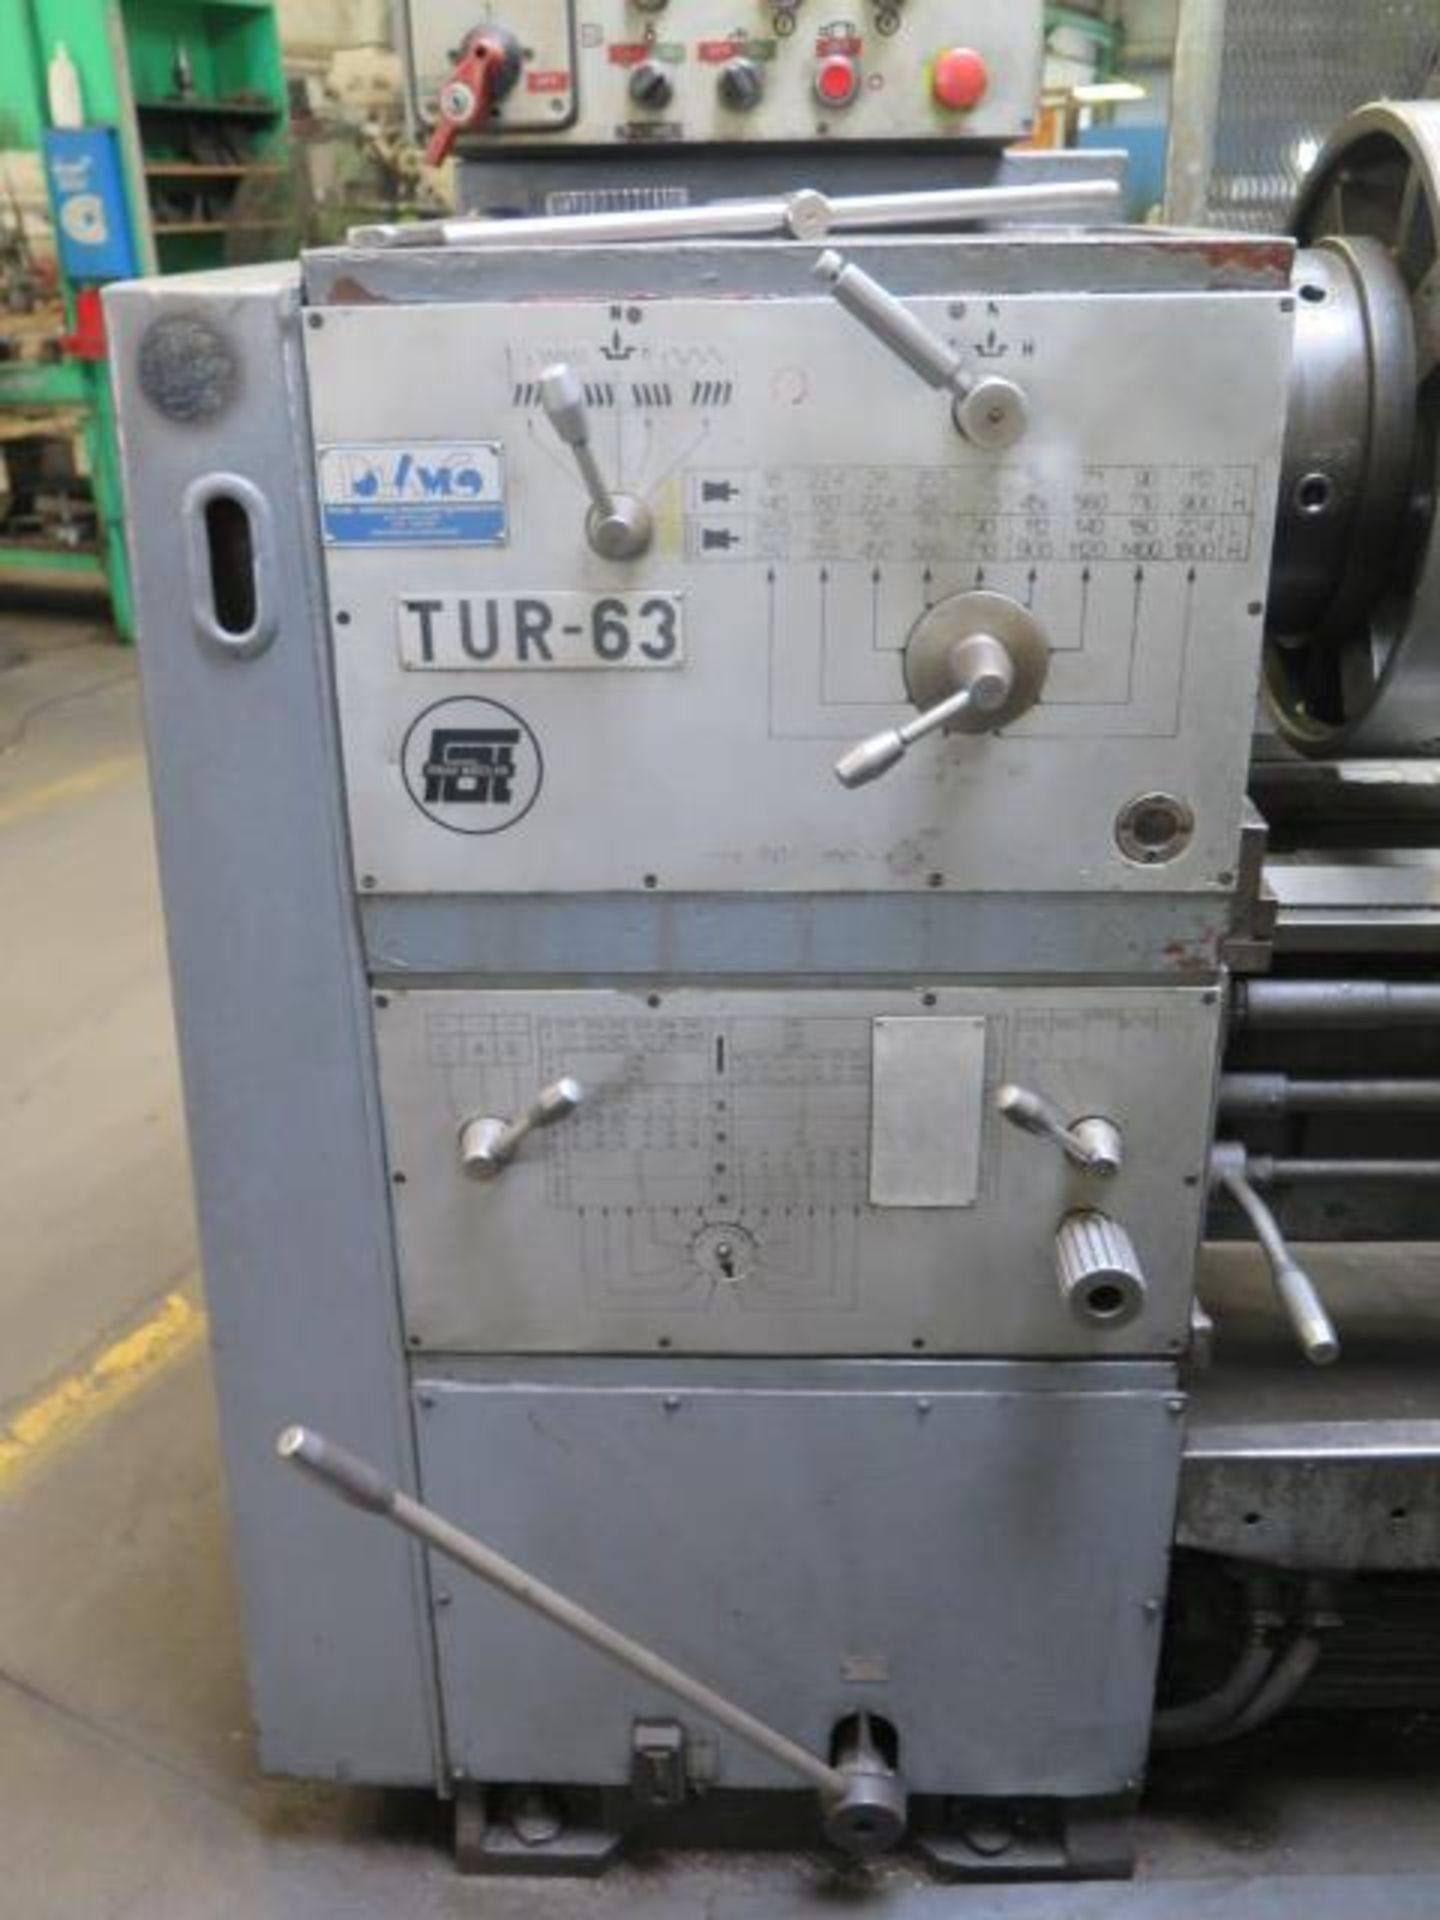 Polamco TUR-63 Big-Bore 25” x 120” Geared Head Gap Bed Lathe s/n 41189 w/ Mitutoyo DRO, SOLD AS IS - Image 4 of 14